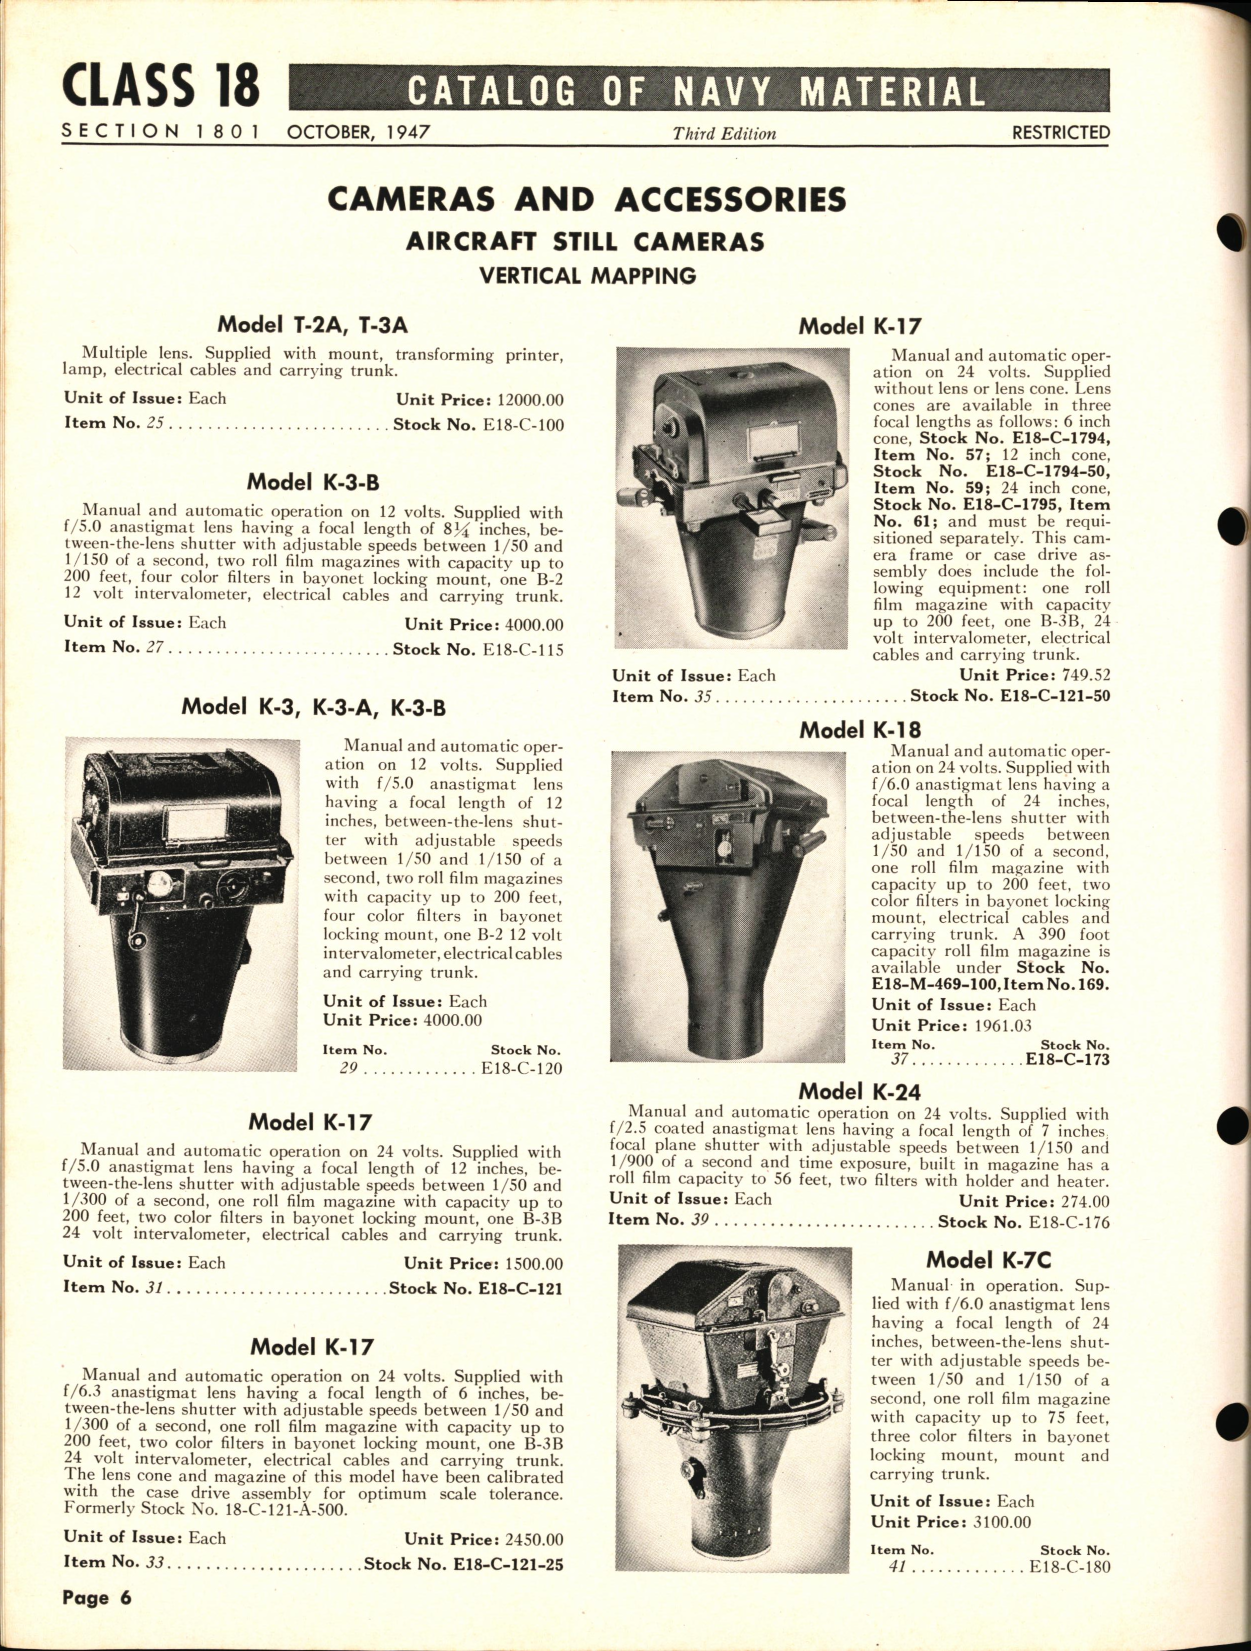 Sample page 6 from AirCorps Library document: Photographic Equipment and Supplies